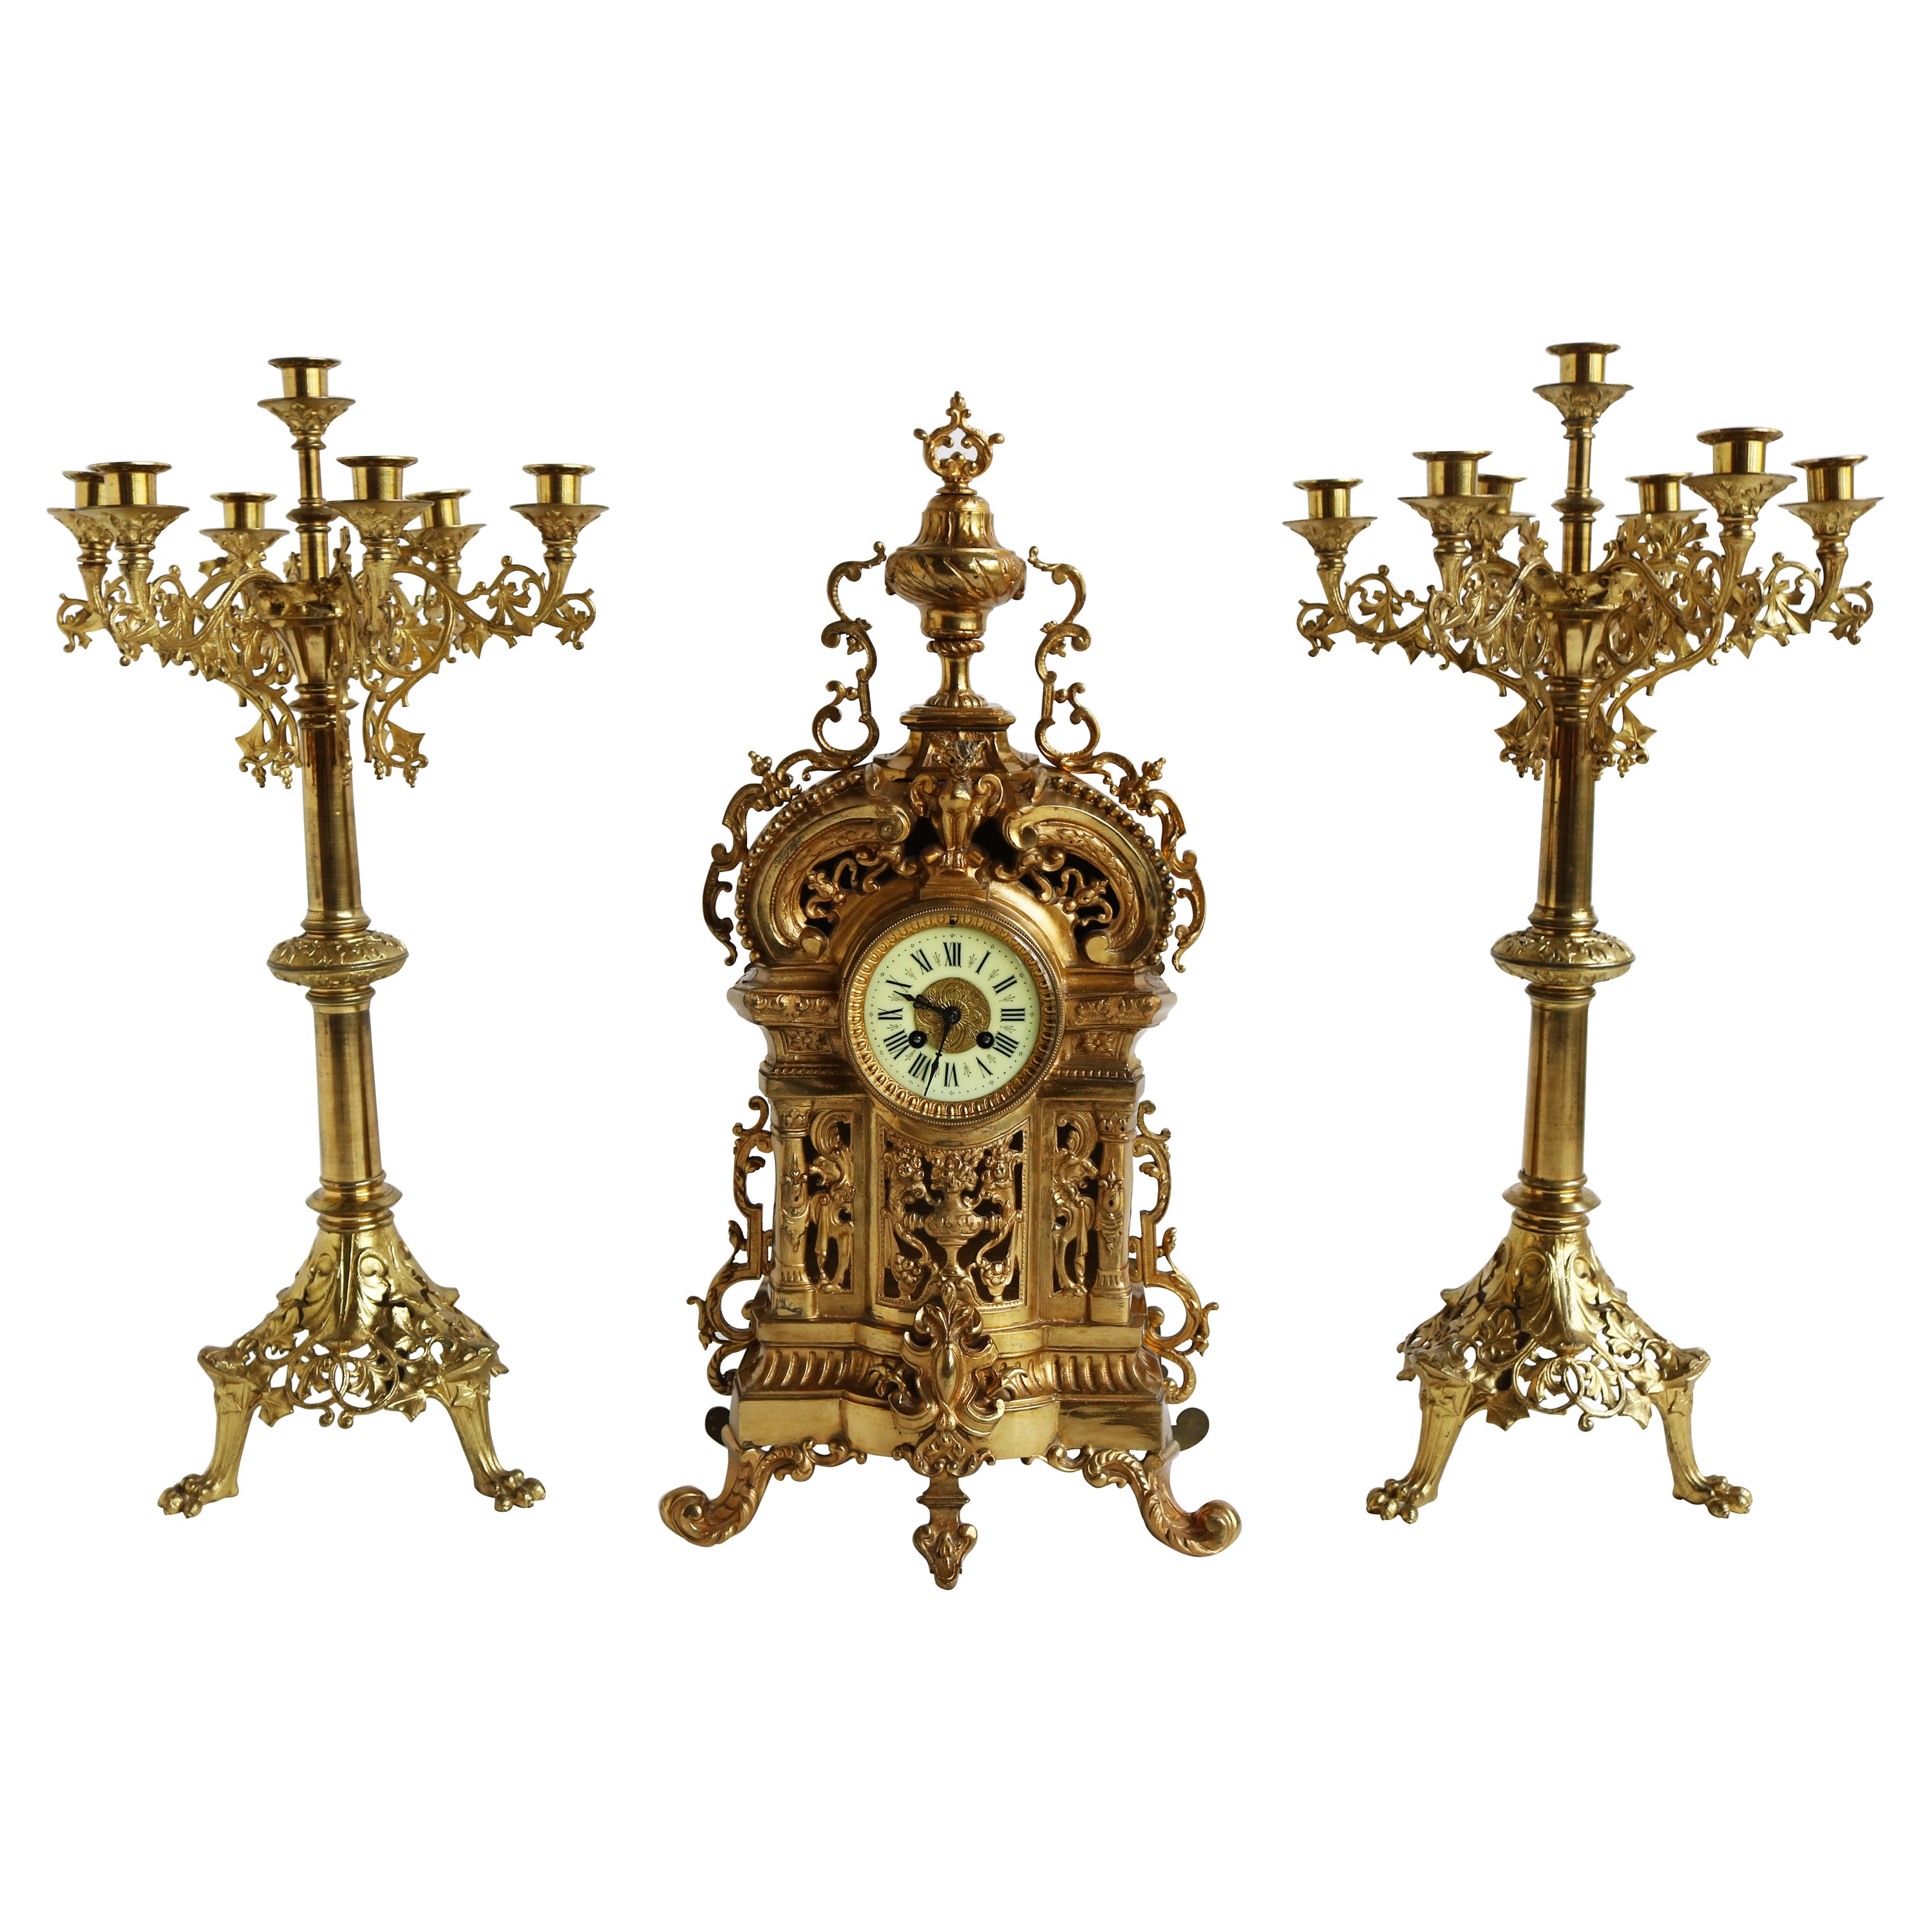 Huge Antique French Gilt Bronze Classical Clock Set 19th century Acanthus leaves For Sale